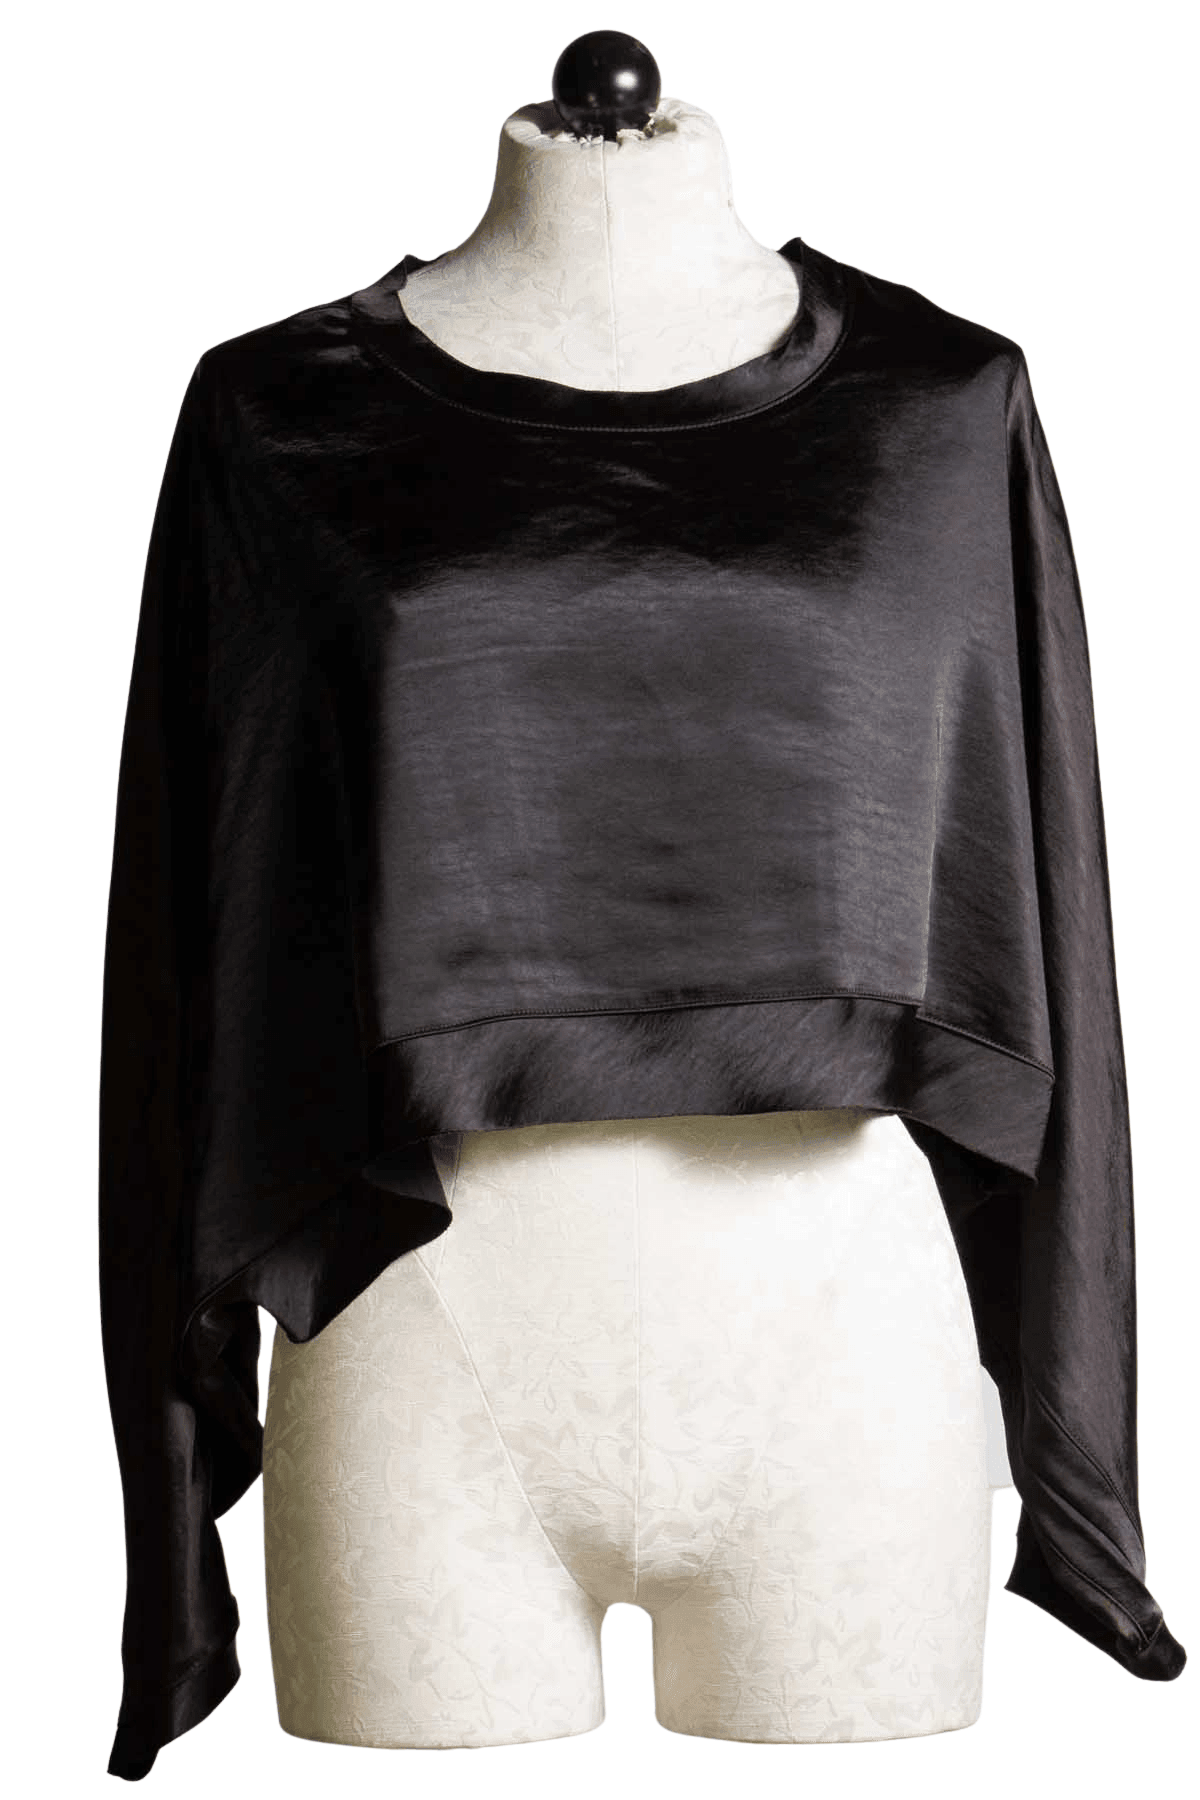 Black Silky Cropped Shrug Top by Planet